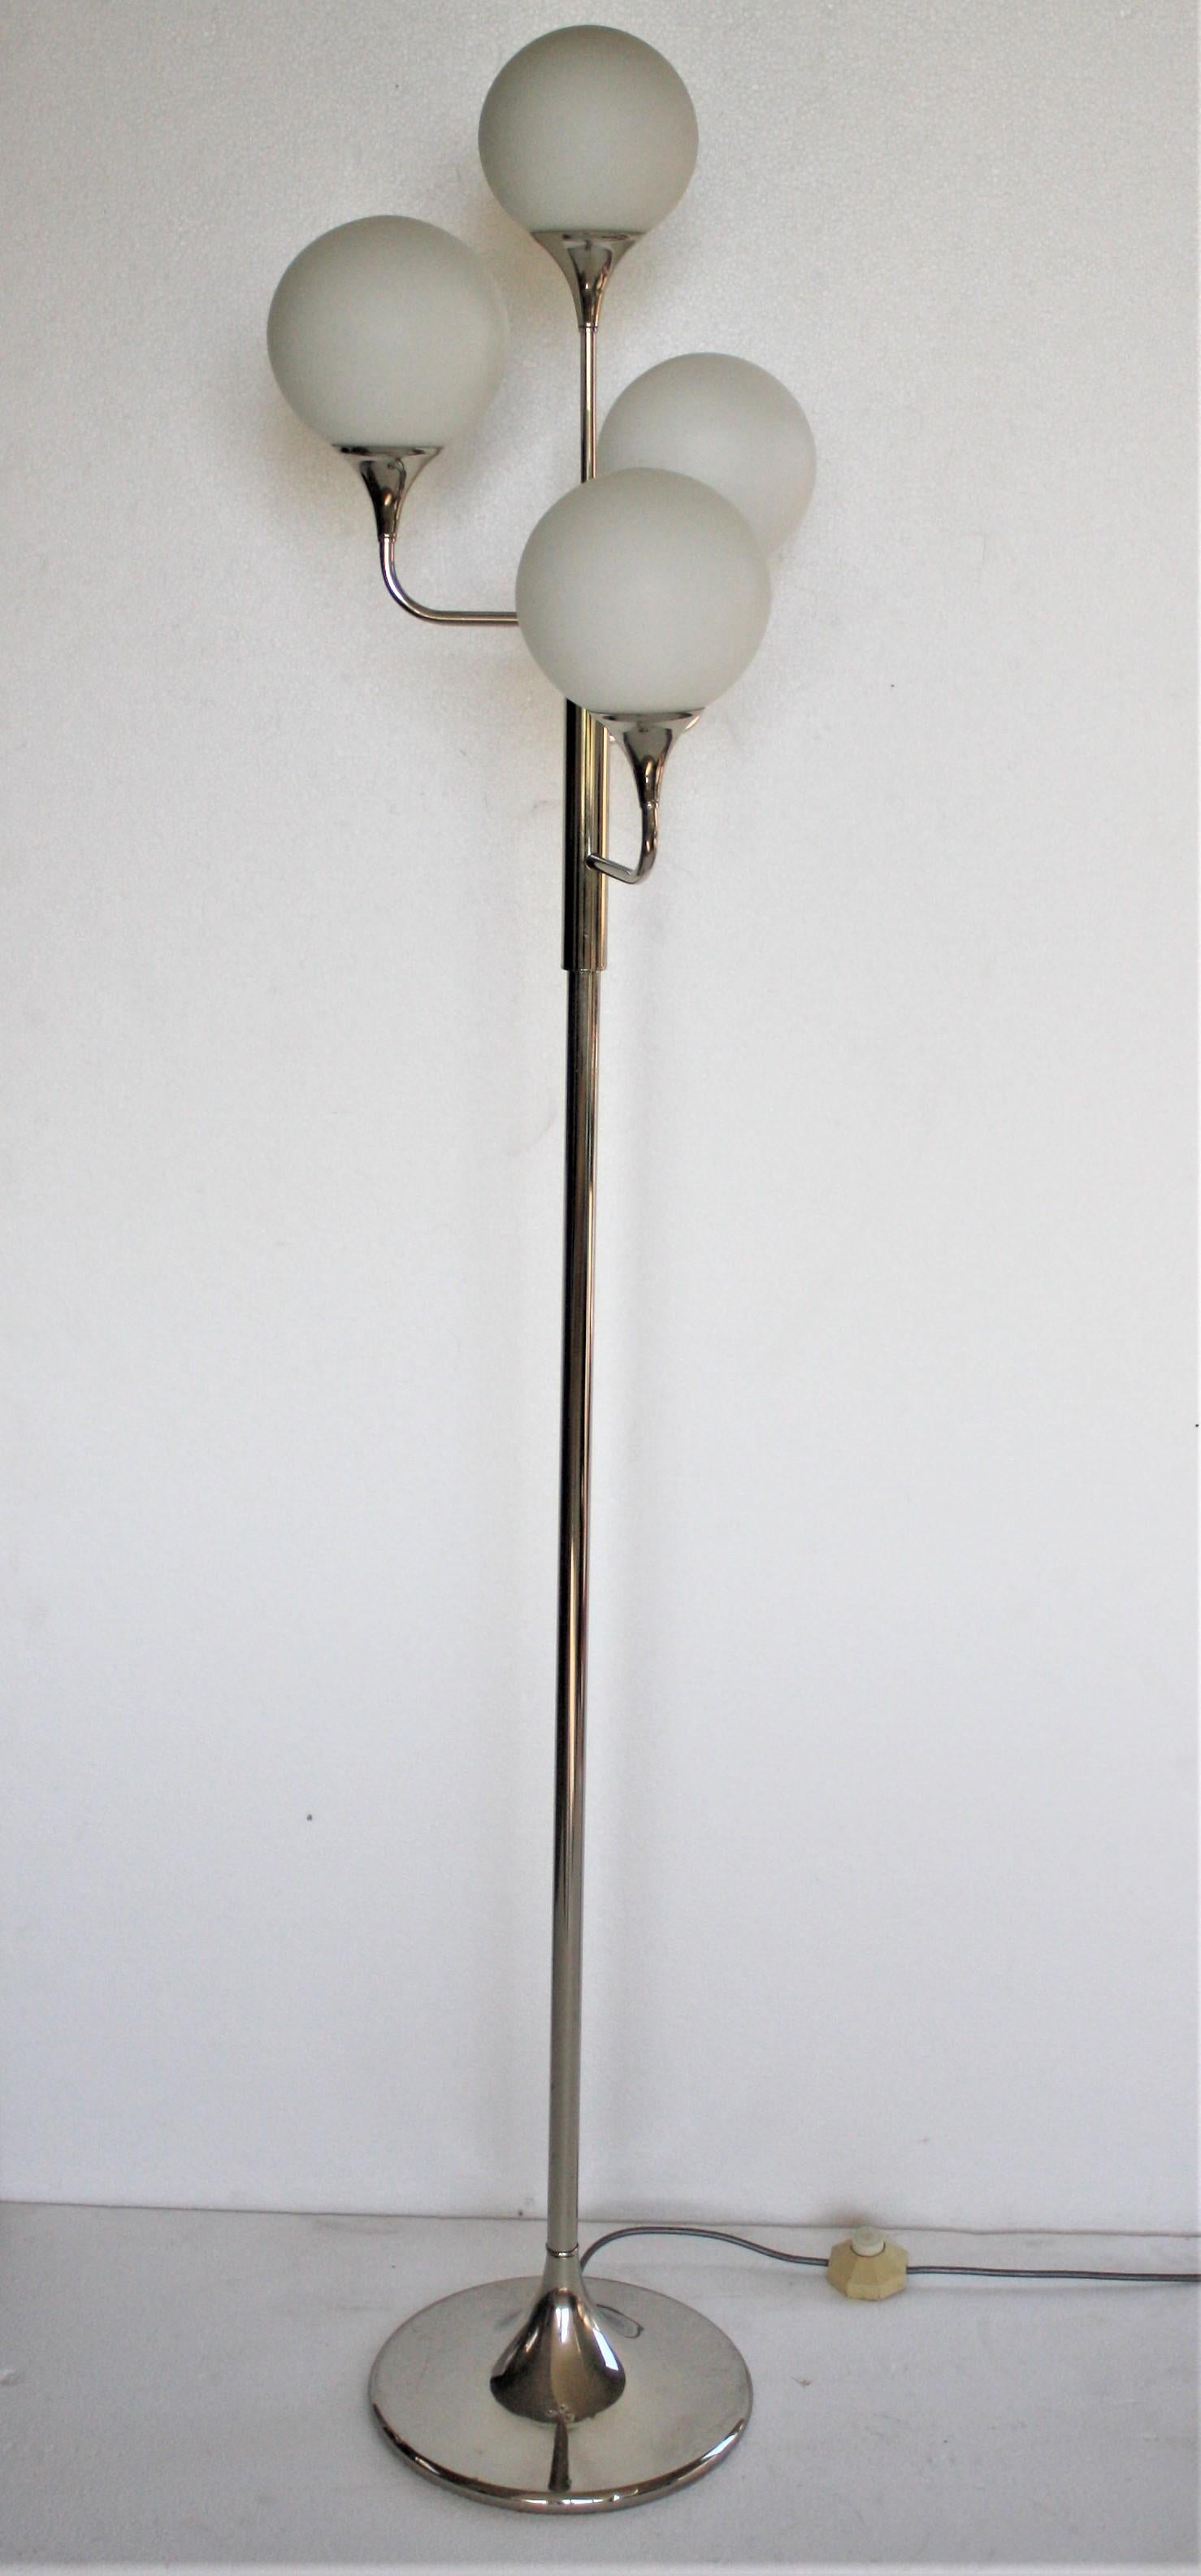 Mid-Century Modern chrome floor lamp with four white glass globe shades.

This 1960s lamp emits a warm light, creates a lovely atmosphere and has a timeless design.

The floor lamp is very much in the style of Stilnovo floor lamps.

Good